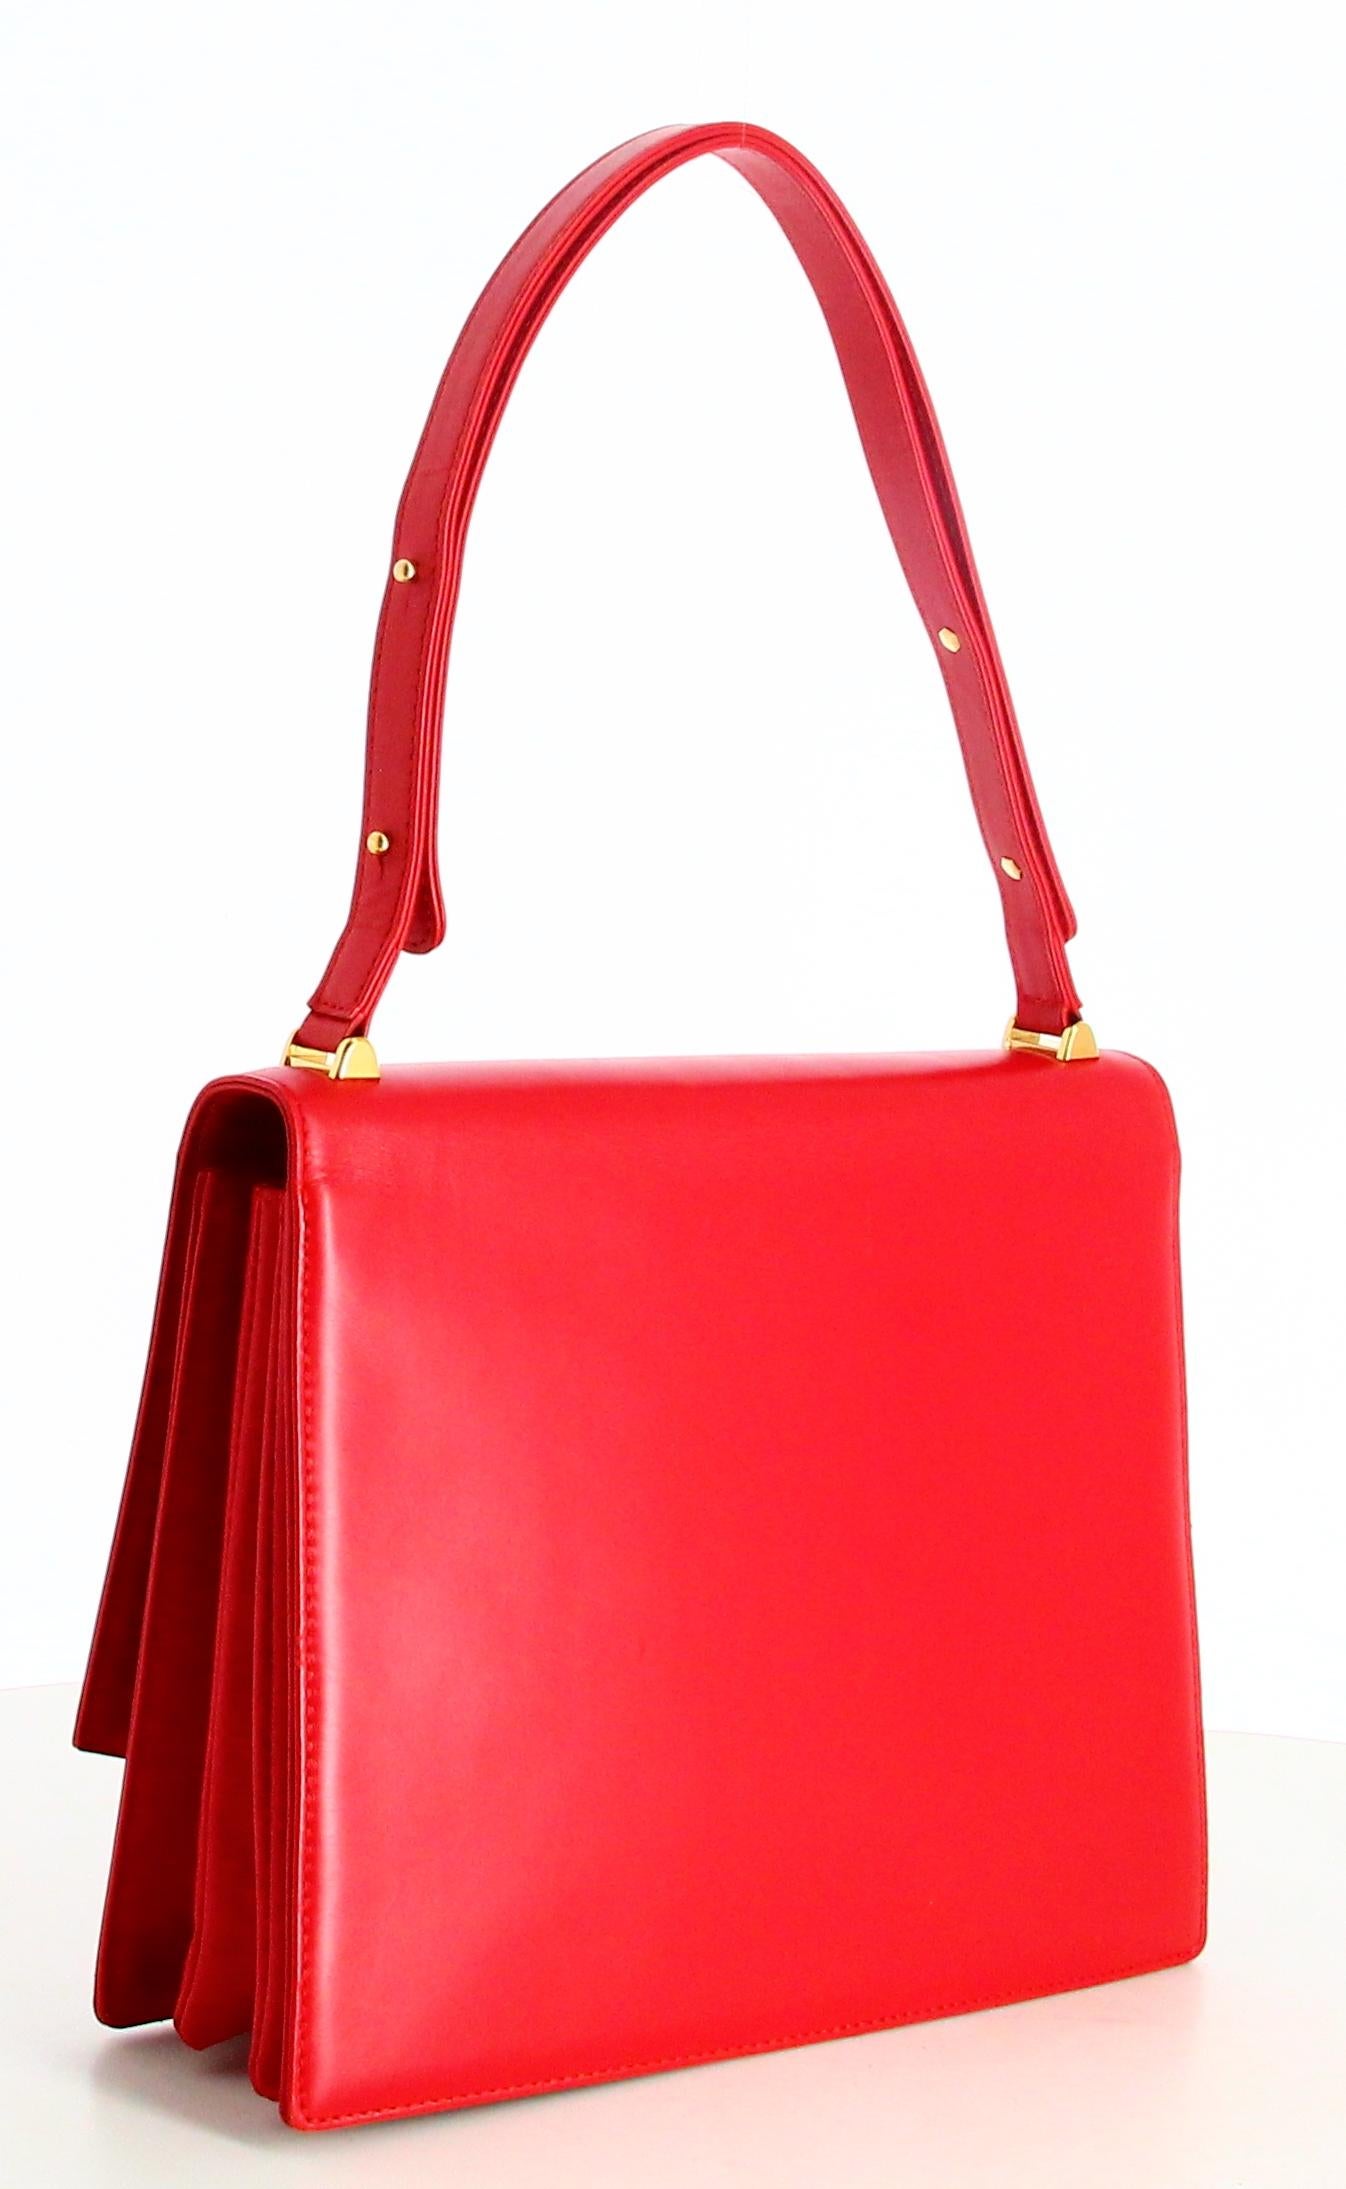 1991 Opera Louis Vuitton Red Leather Handbag  For Sale 2